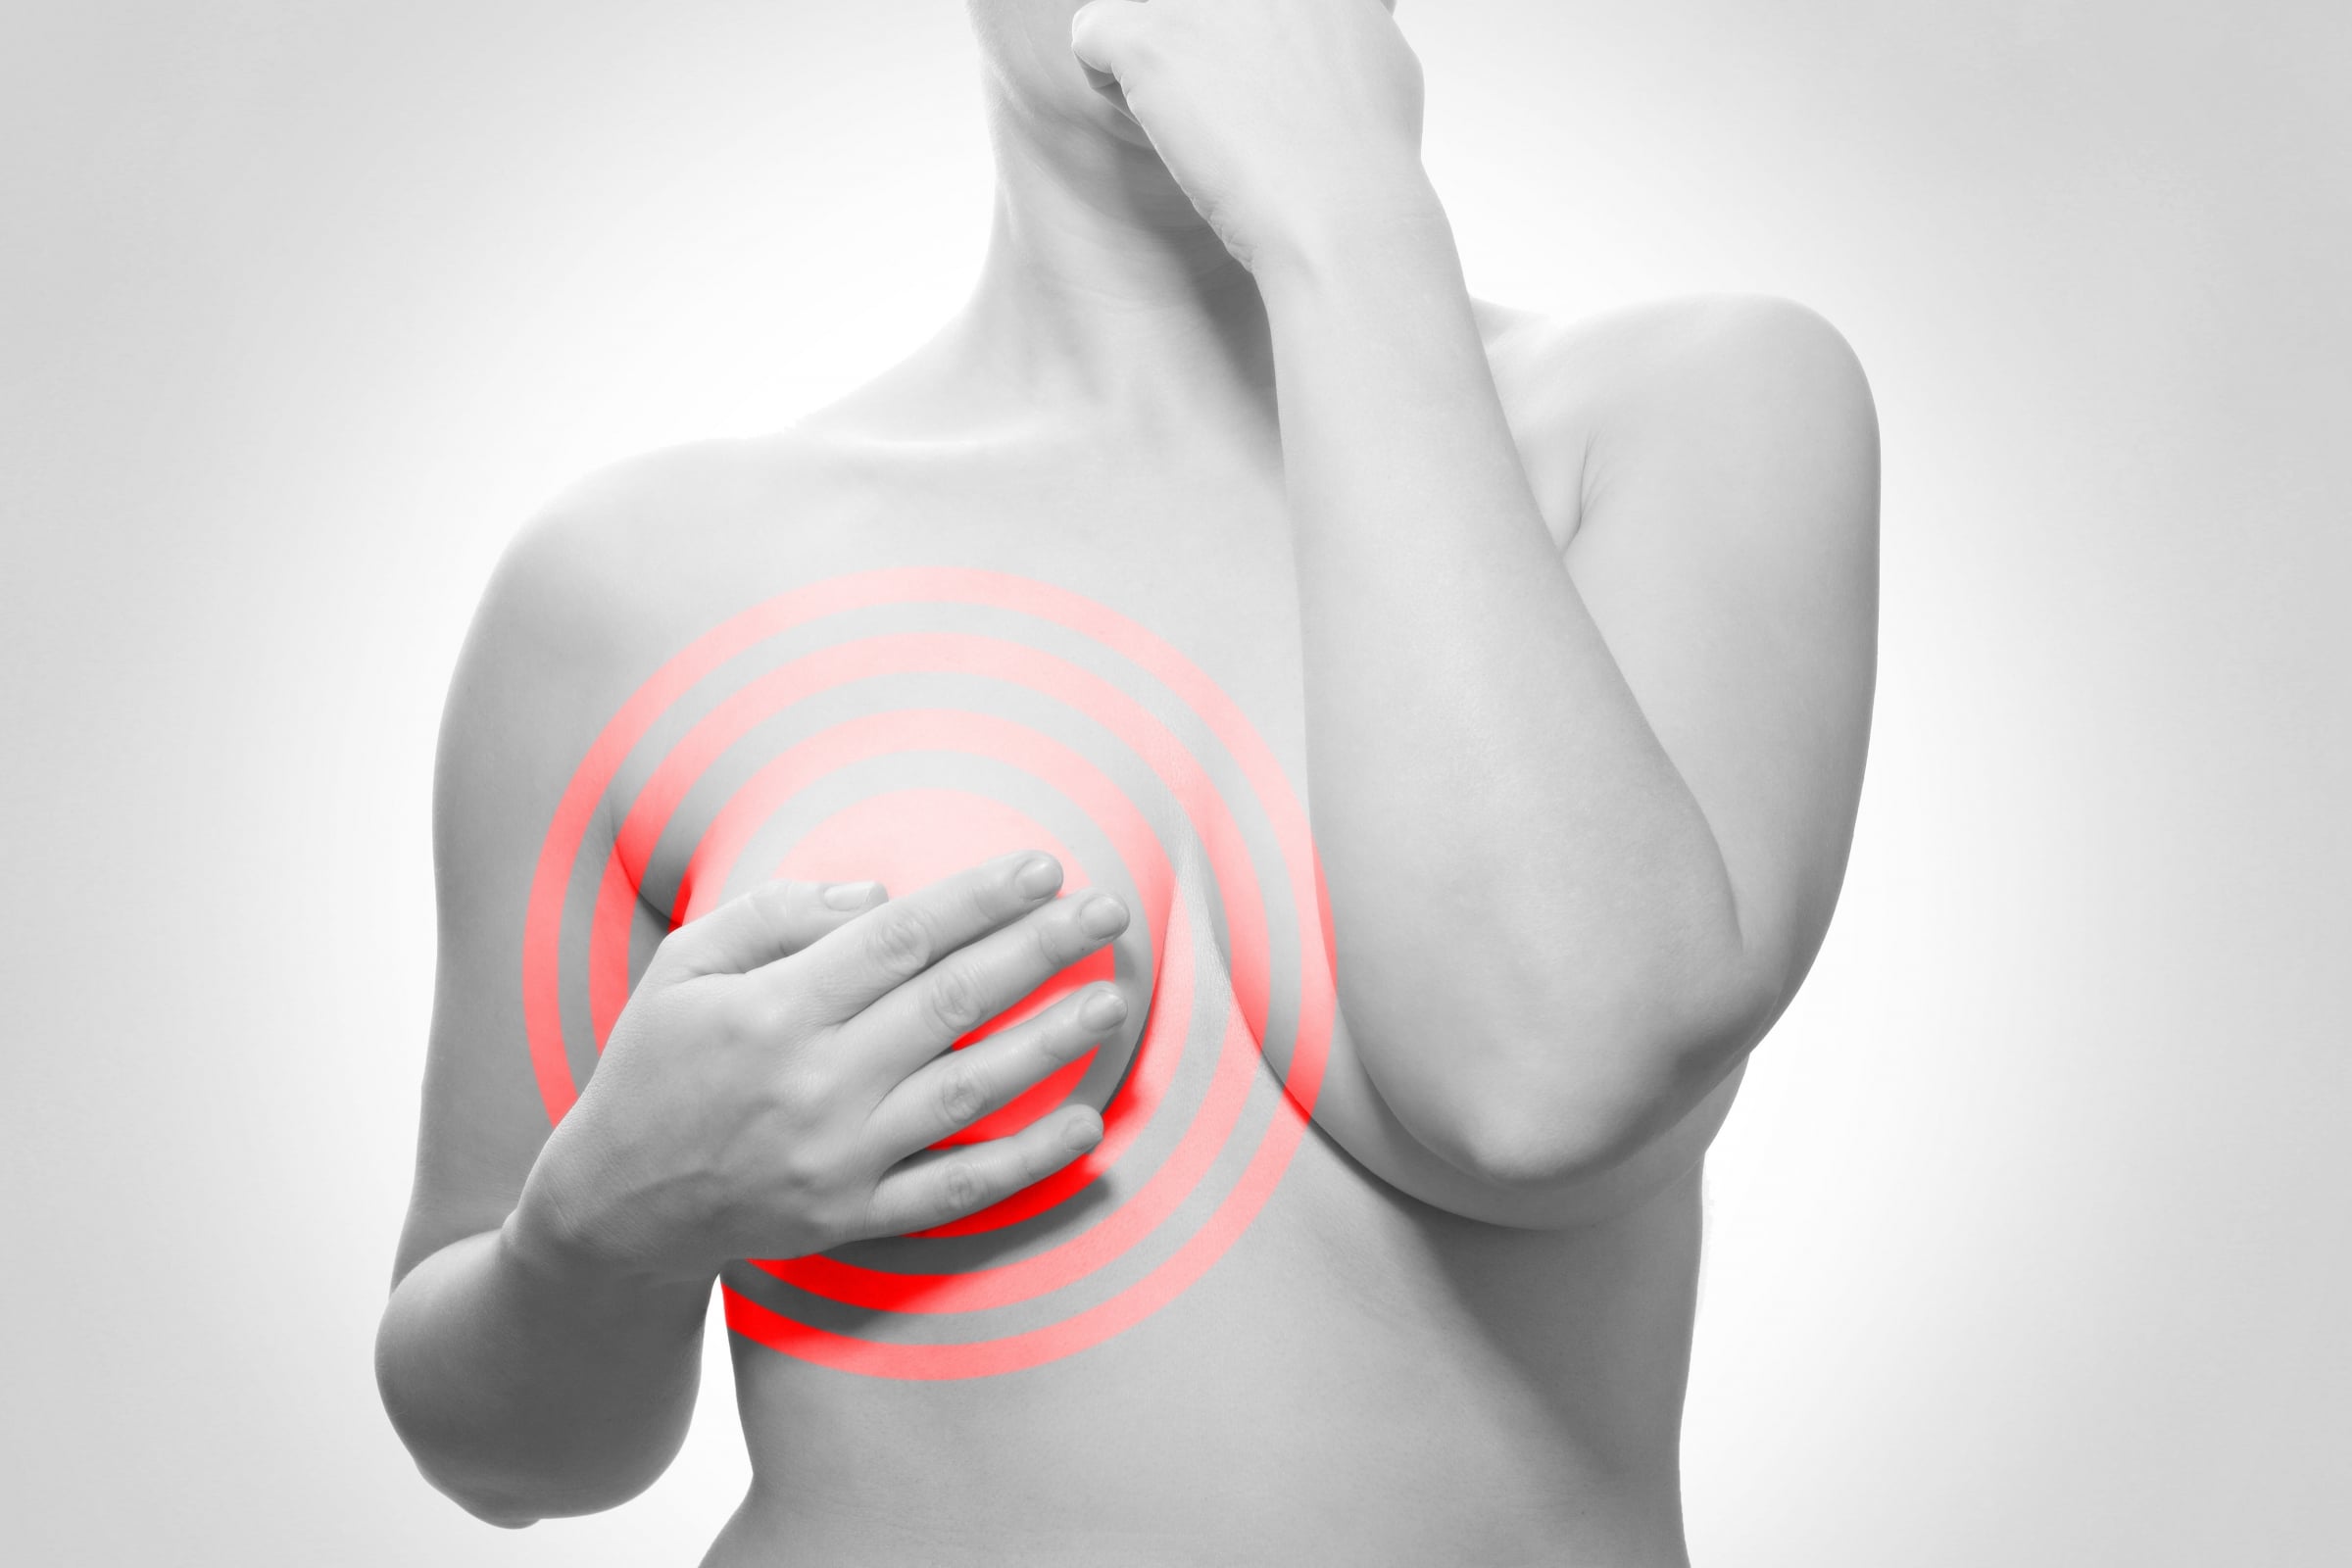 Breast Pain After Implant Placement